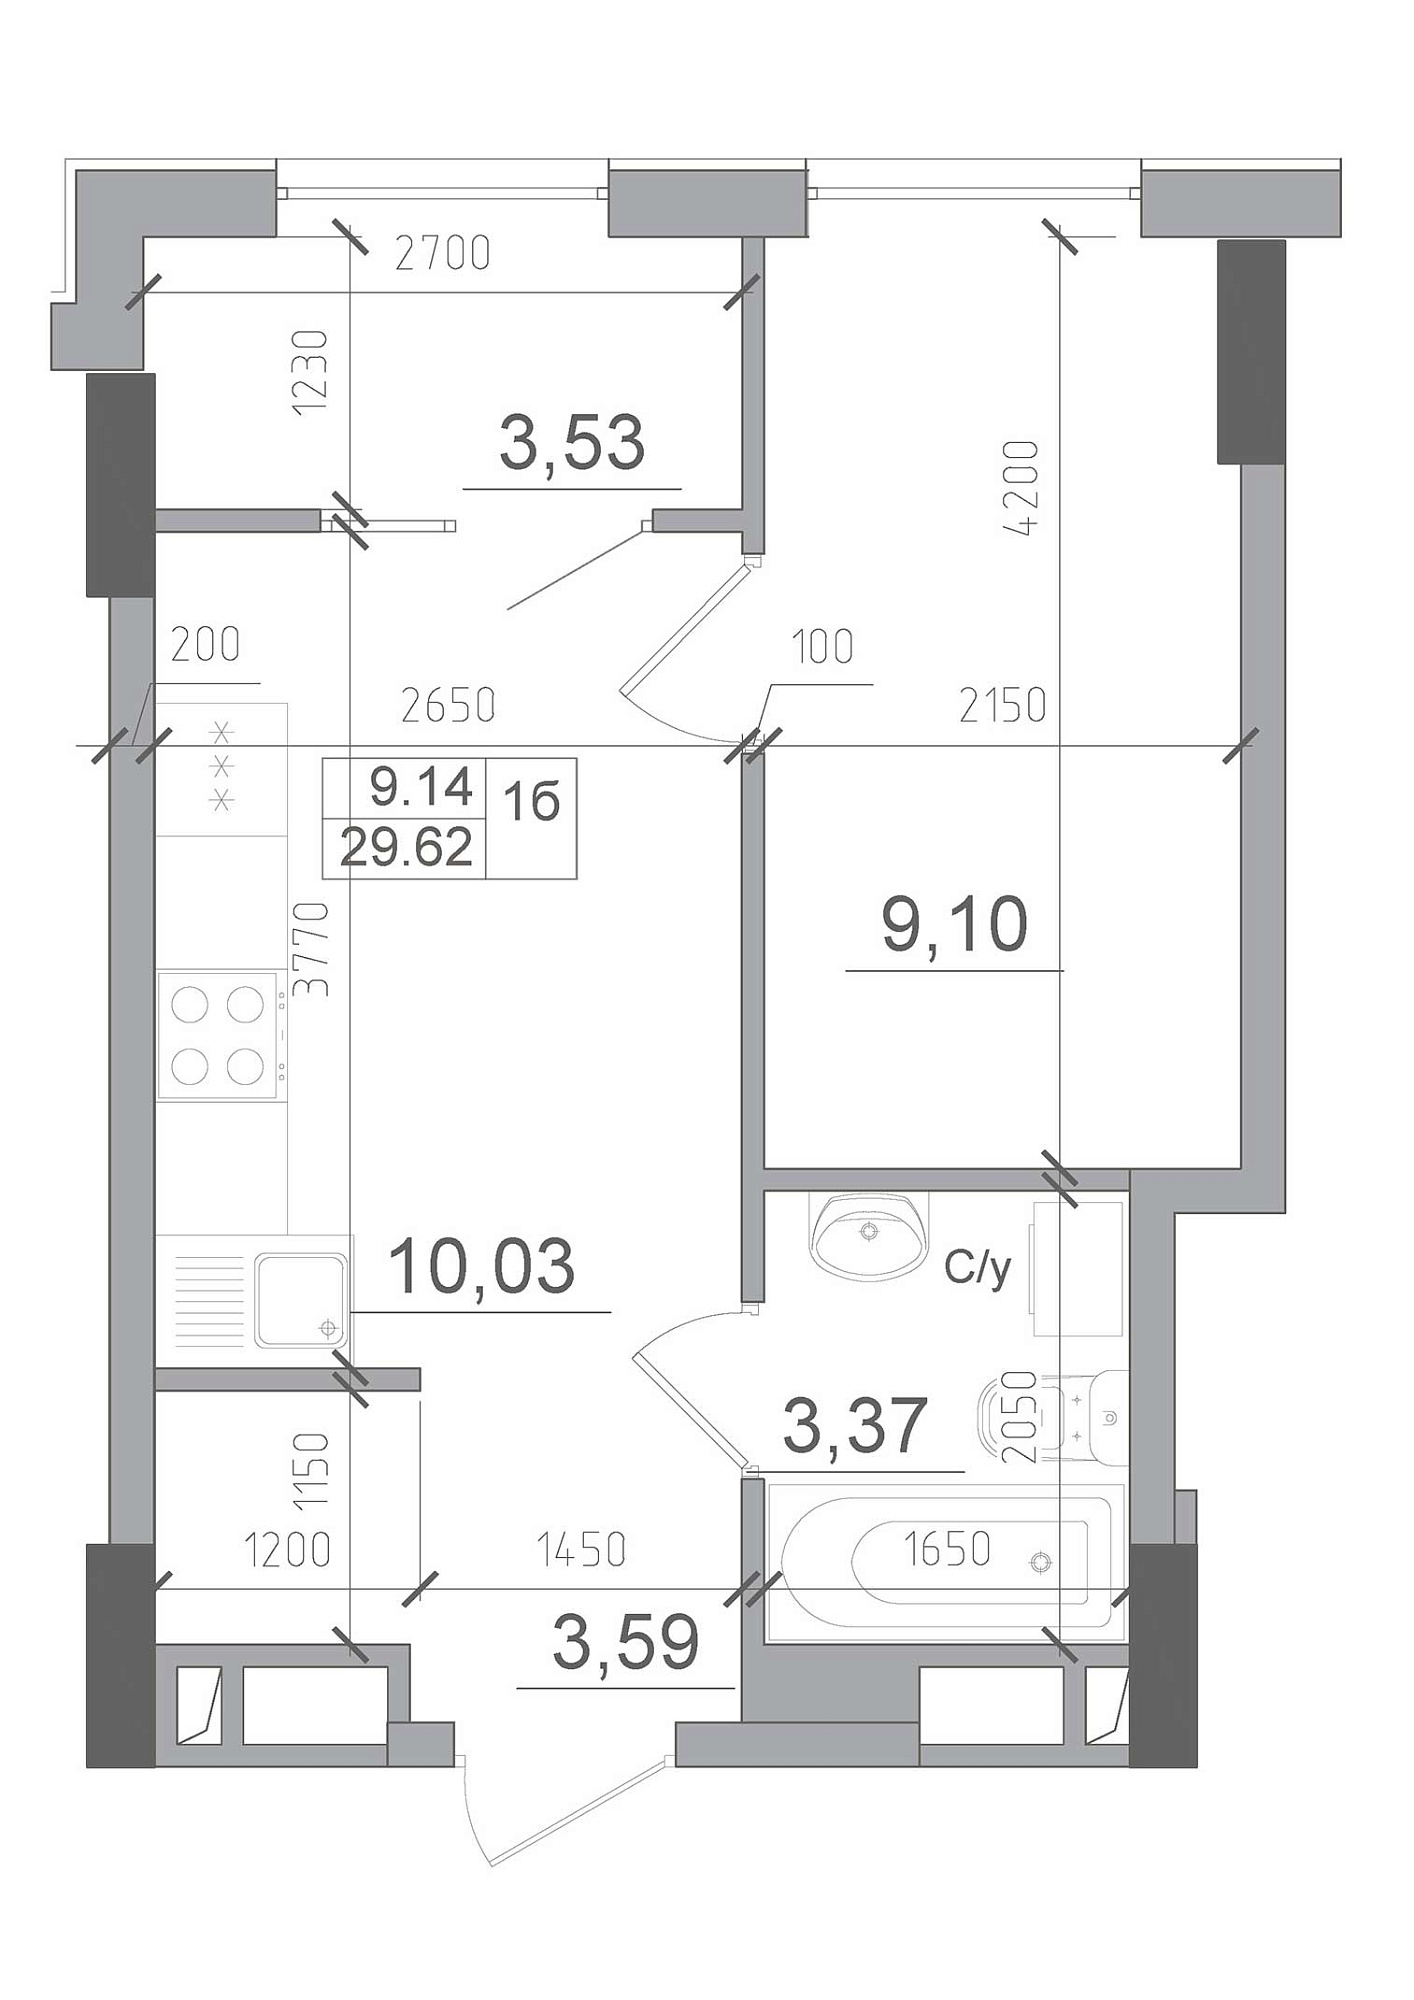 Planning 1-rm flats area 29.62m2, AB-22-06/00002.